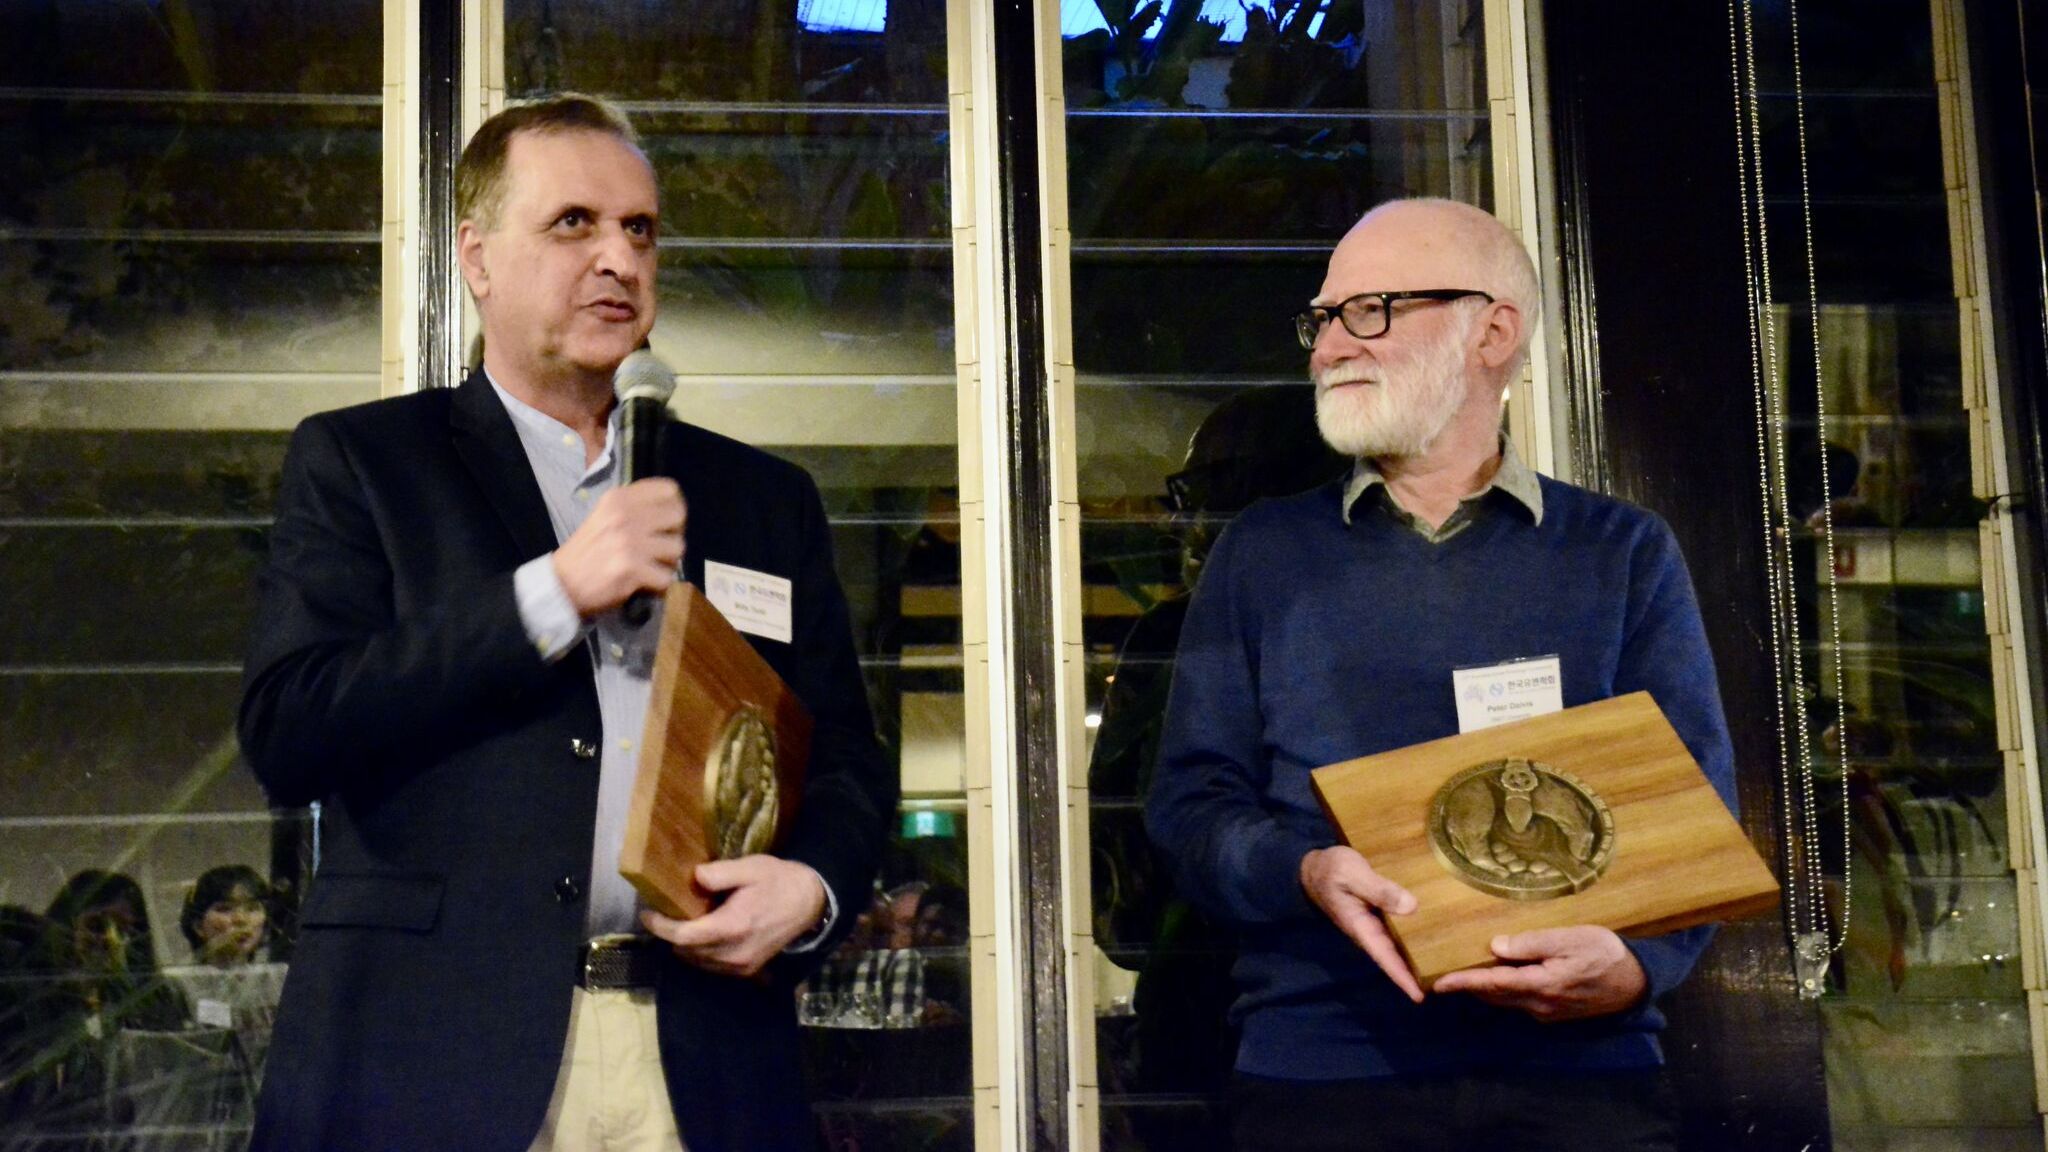 Two middle aged men in professional dress holding wooden awards, man on left is holding a microphone and speaking.